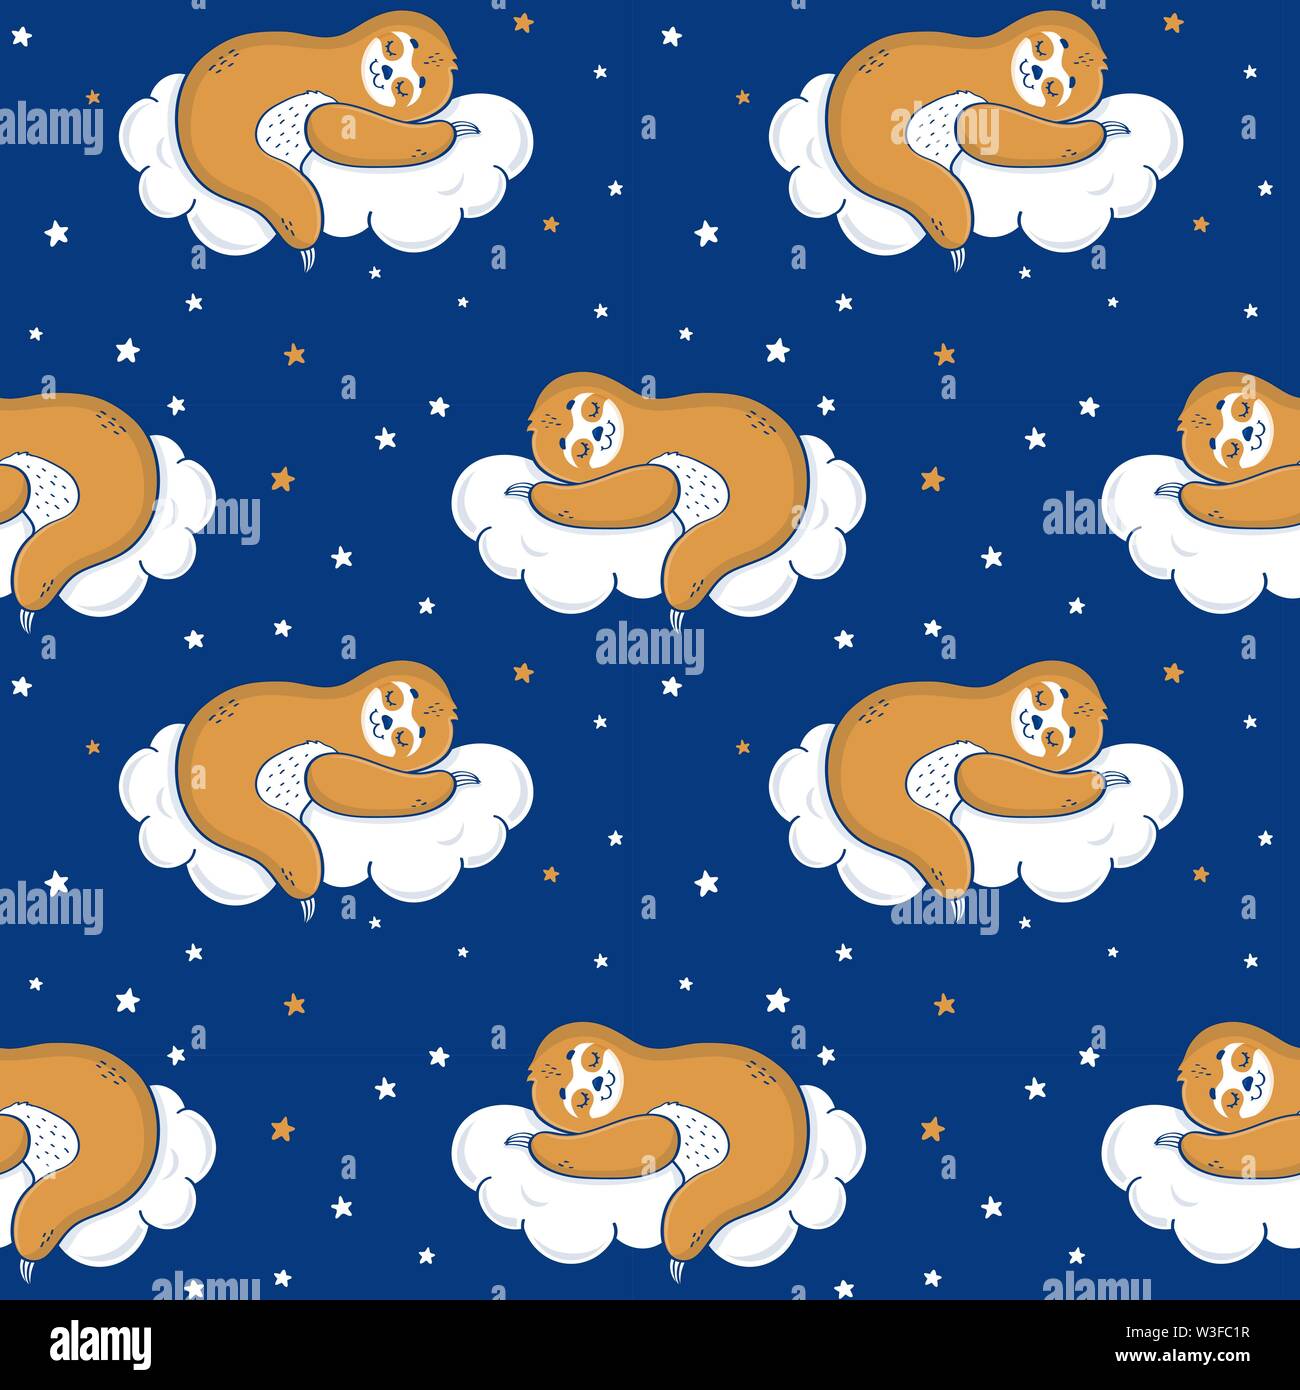 Seamless pattern with cute sloth sleeping on a cloud. Vector background. Stock Vector